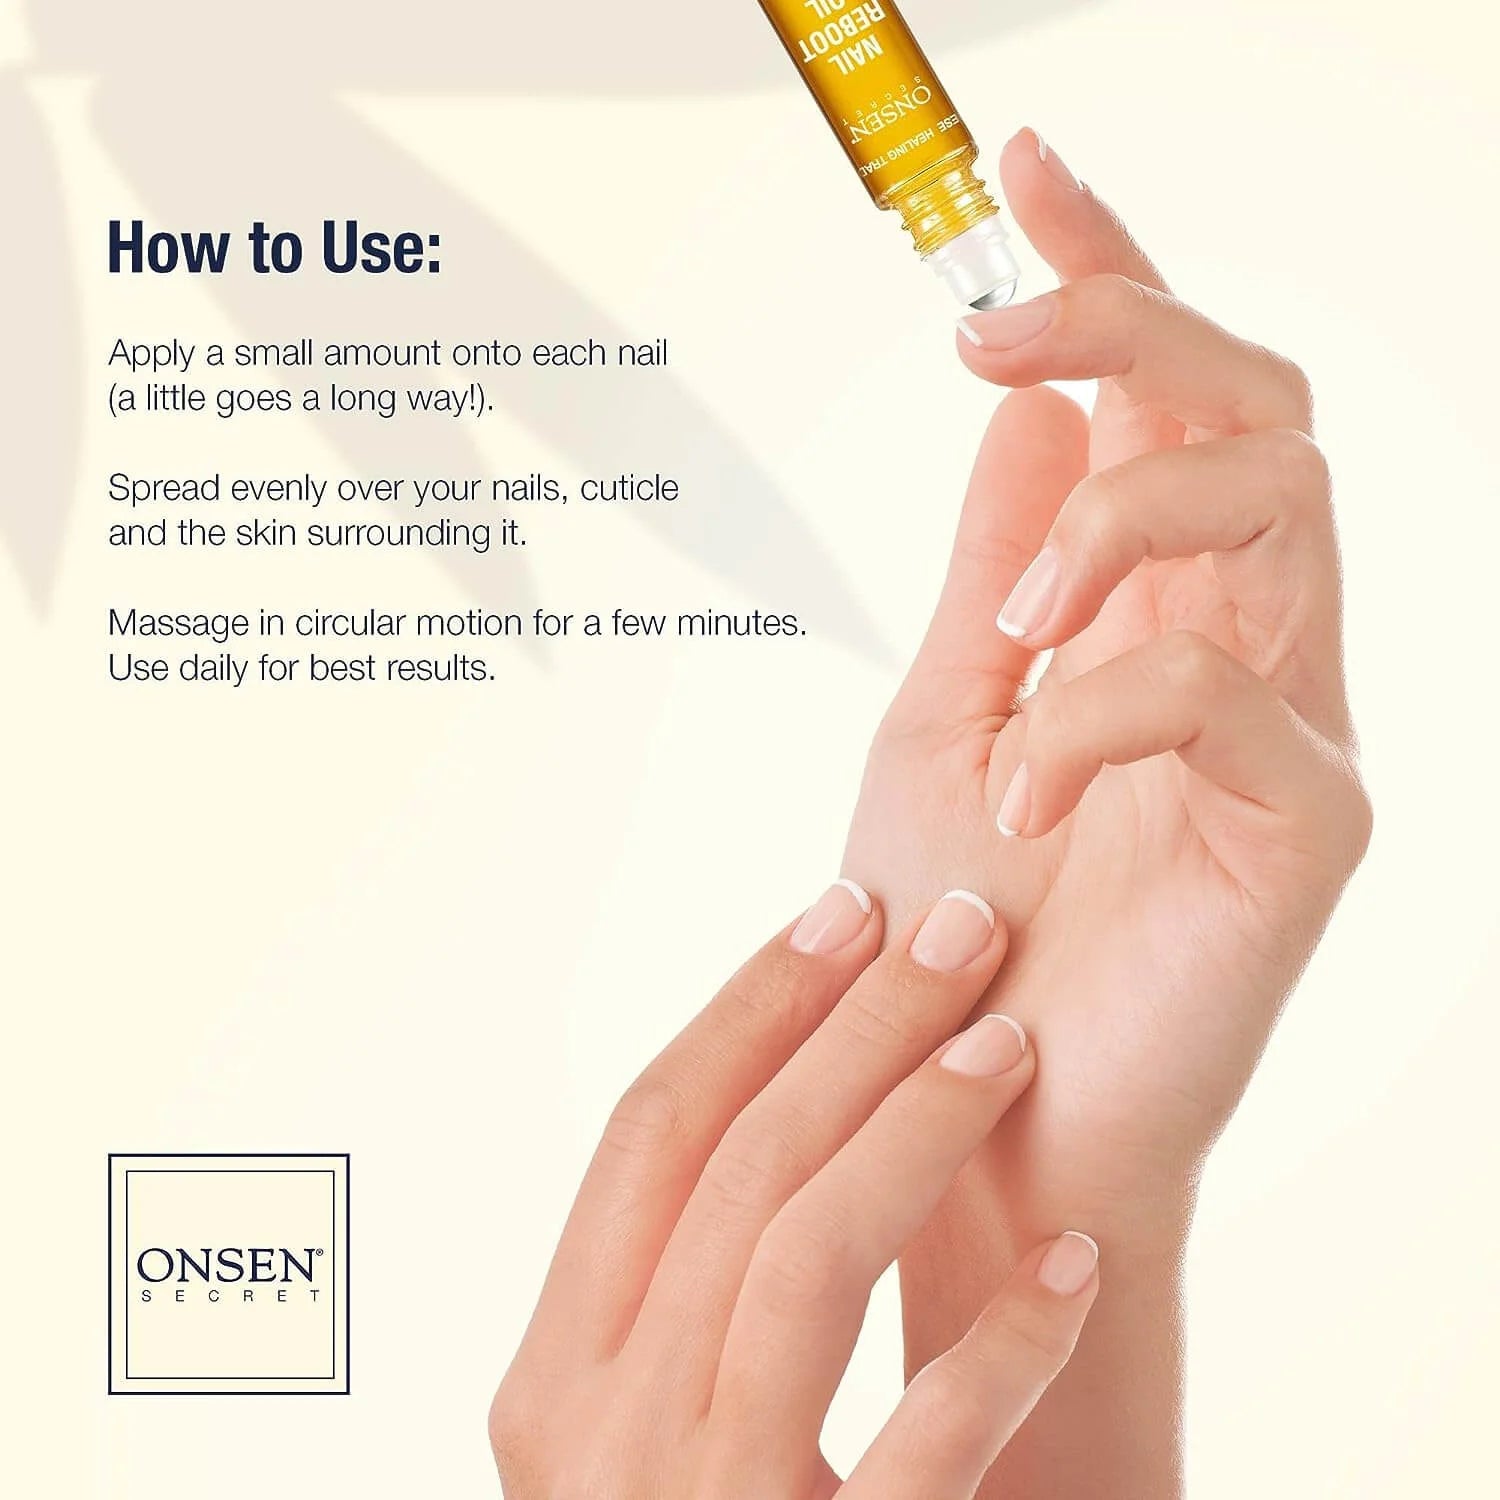 cuticle oil for nail growth